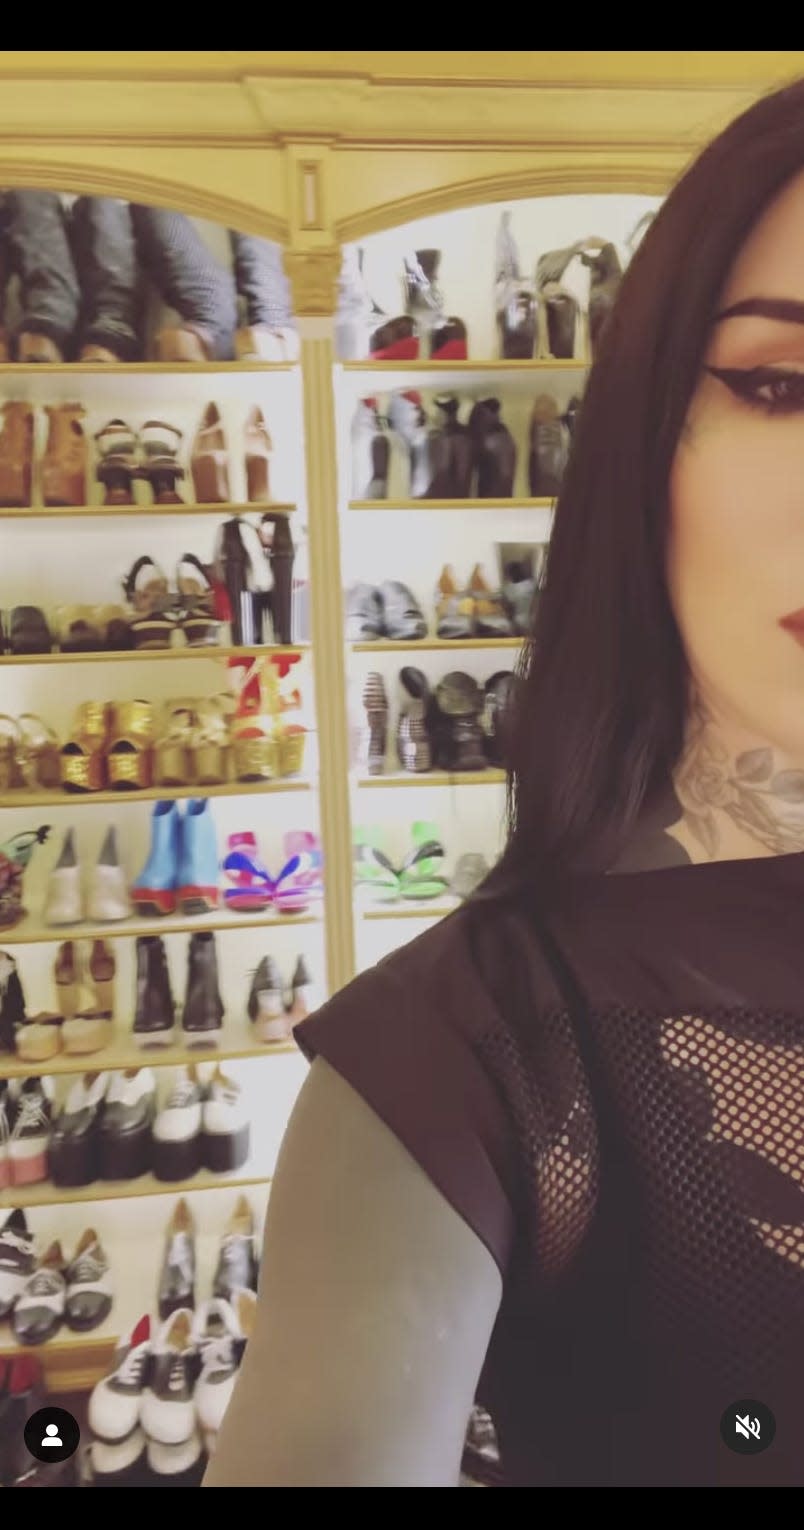 Kat Von D shows a section of her shoe closet on Instagram.